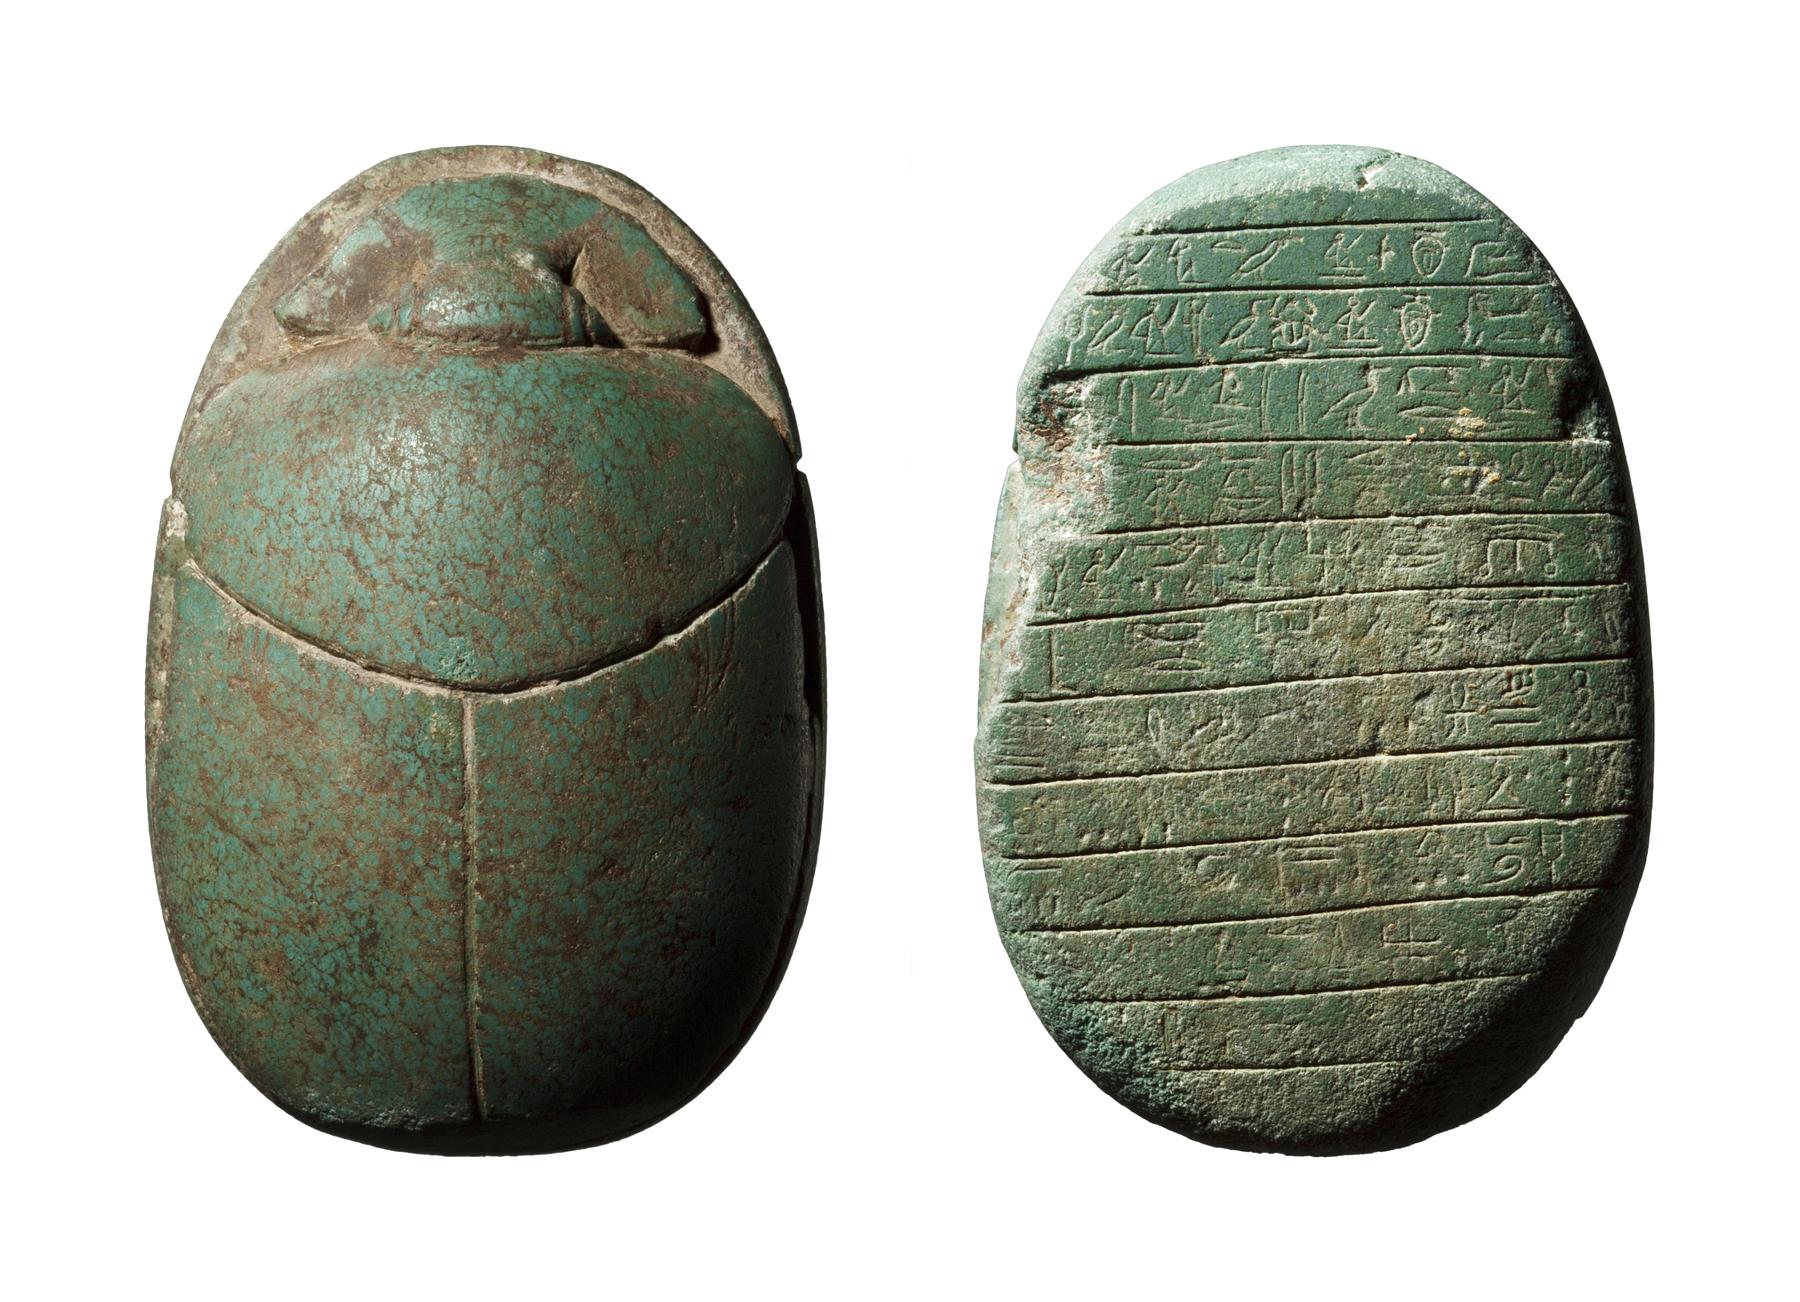 Scarab with hieroglyphic inscription from The Book of the Dead (?), H402